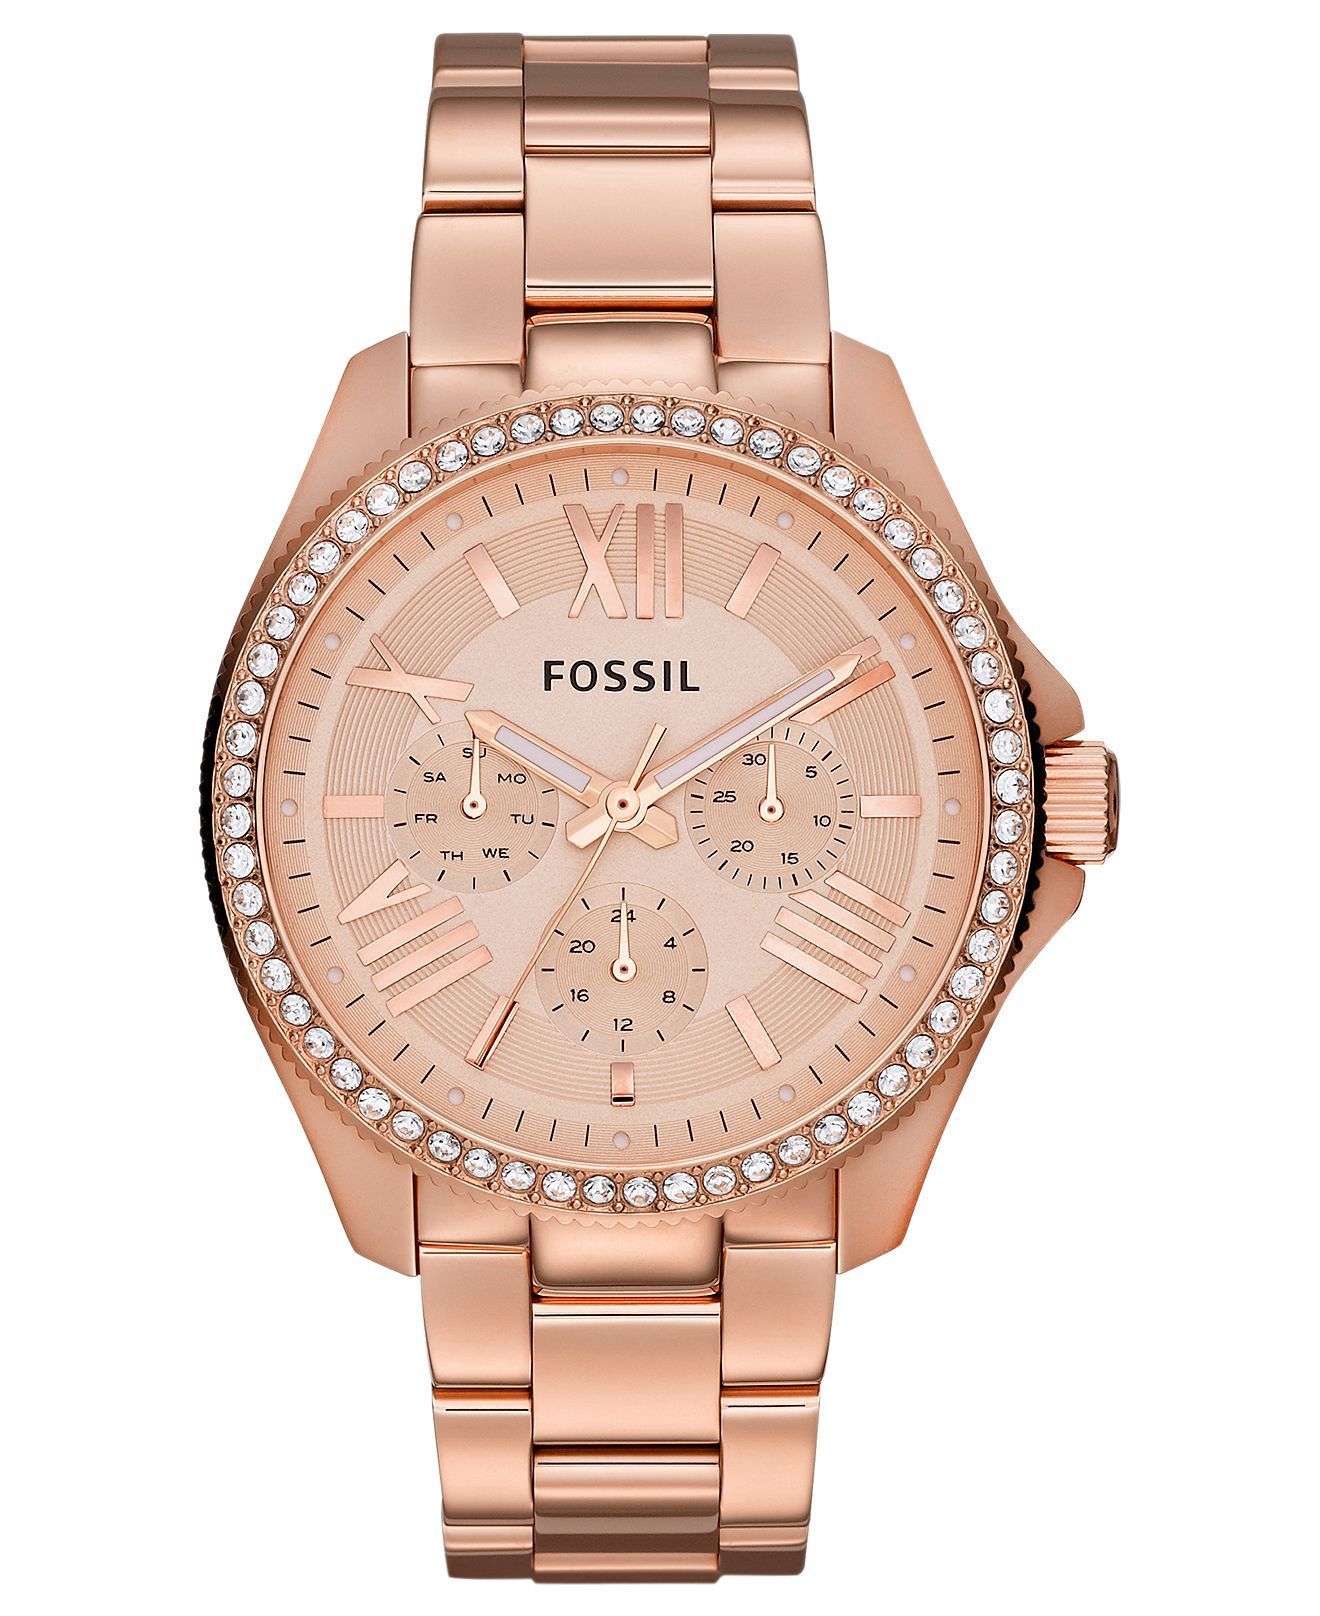 Fossil Watch, Women’s Cecile Rose Gold-Tone Stainless Steel Bracelet 40mm AM4483 – All Fossil Watches – Jewelry & Watches – Macy’s